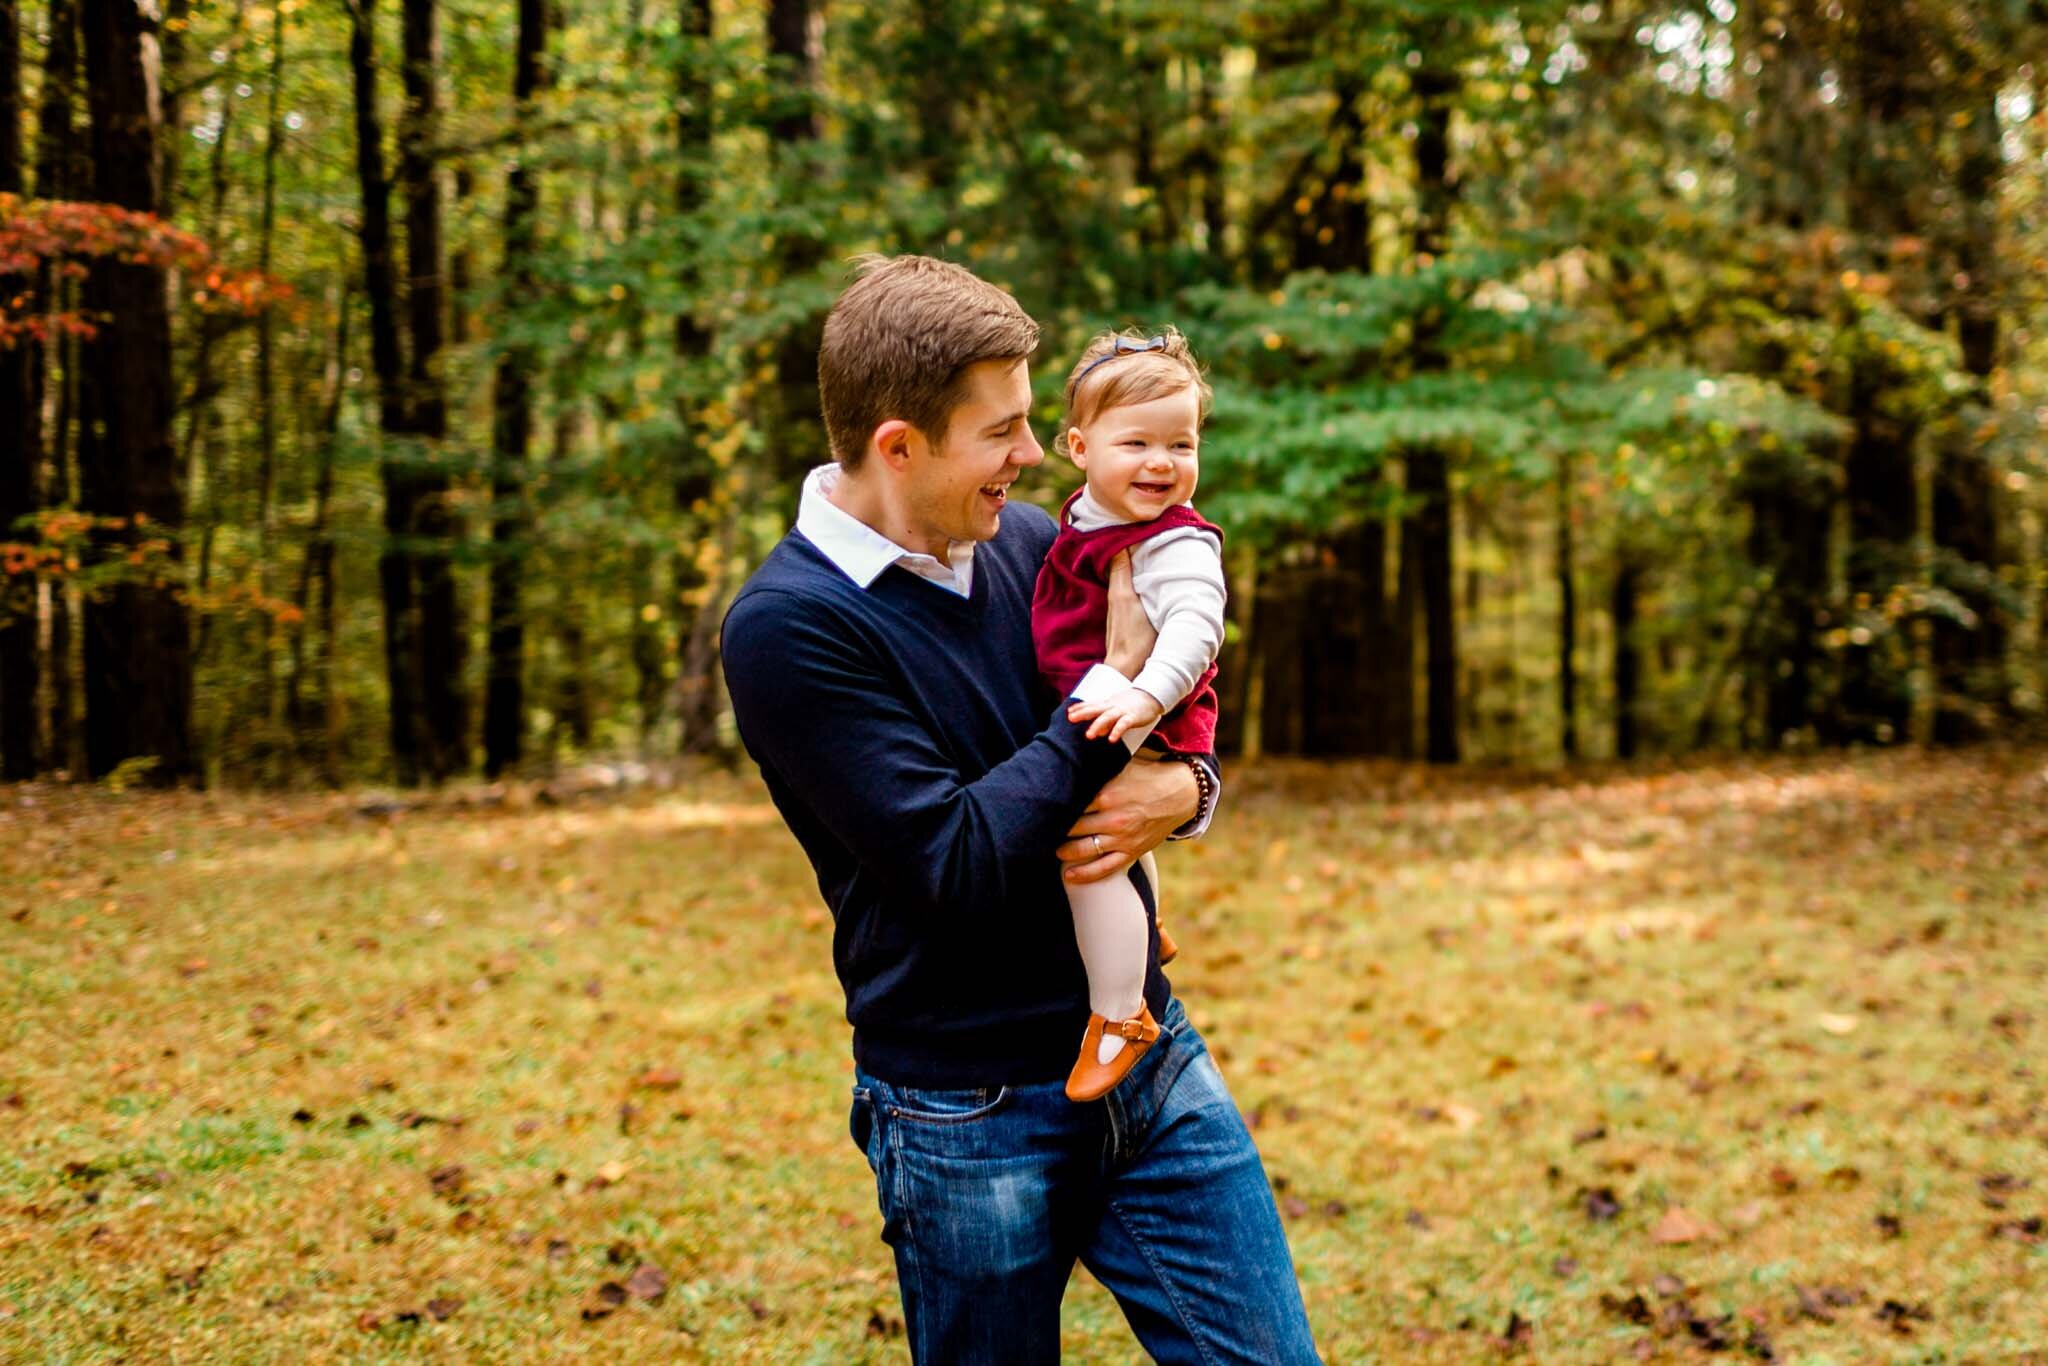 Raleigh Family Photographer | By G. Lin Photography | Umstead Park | Dad running around with baby girl